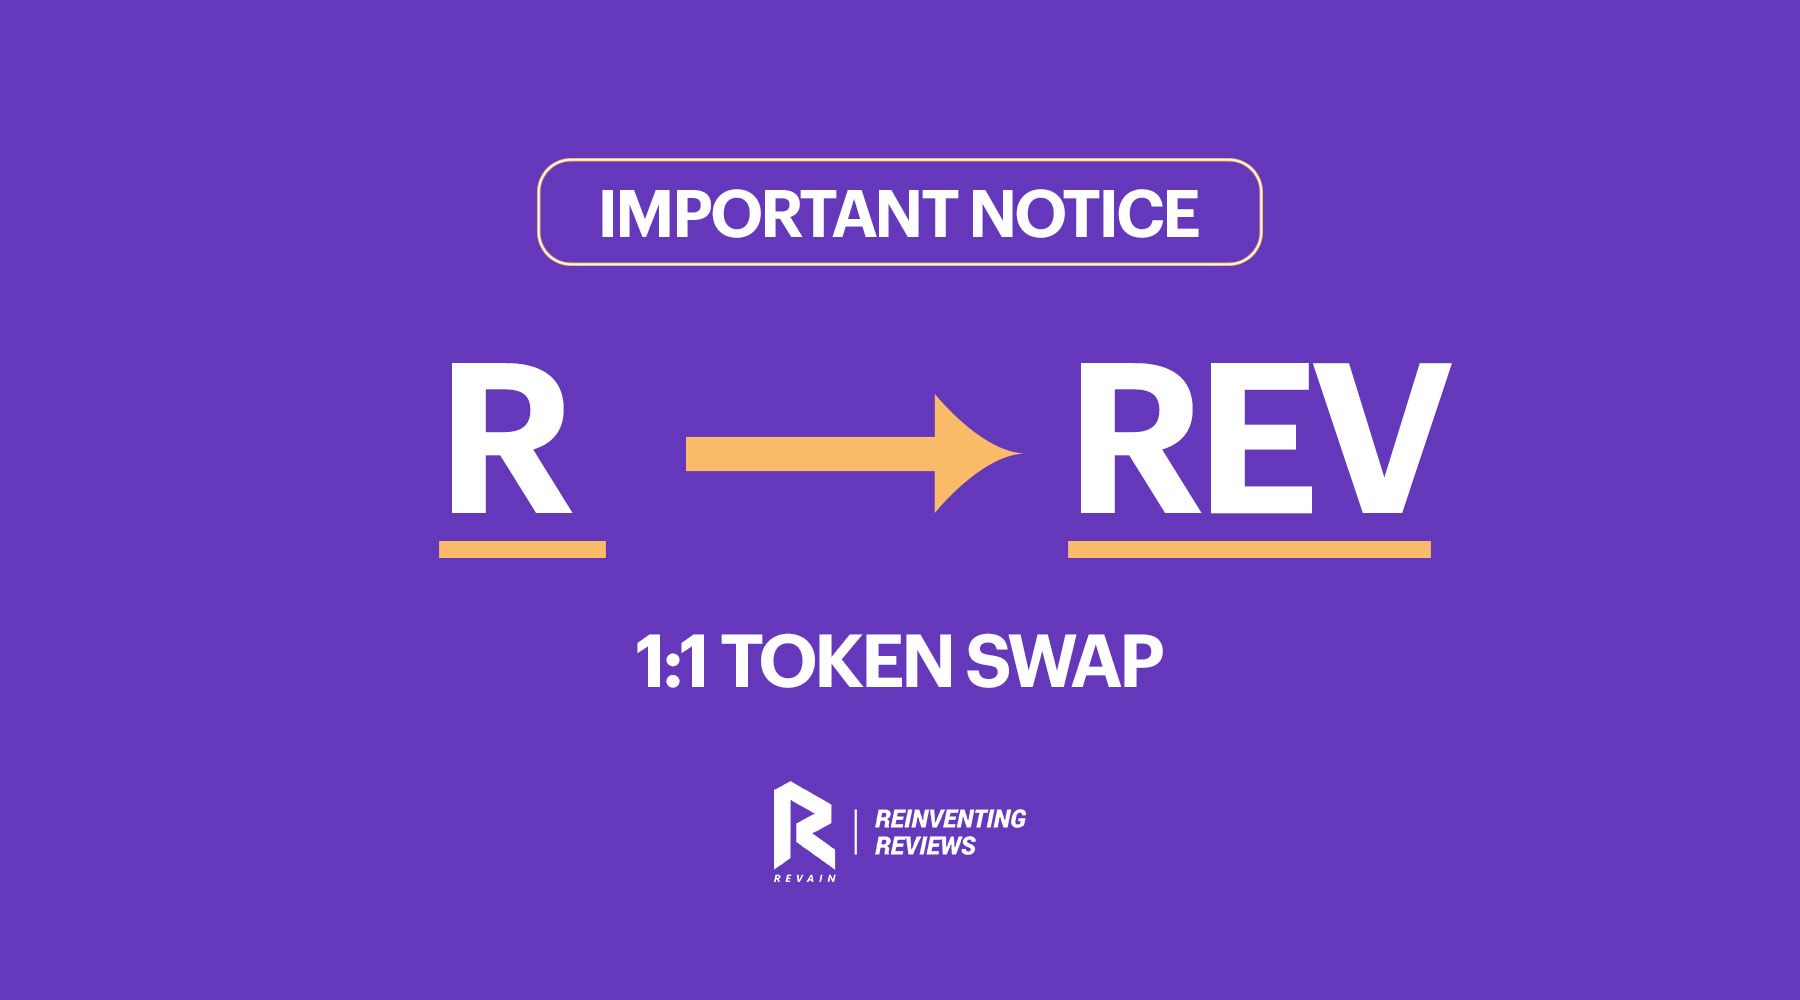 Important message for all R token holders: R swap is coming